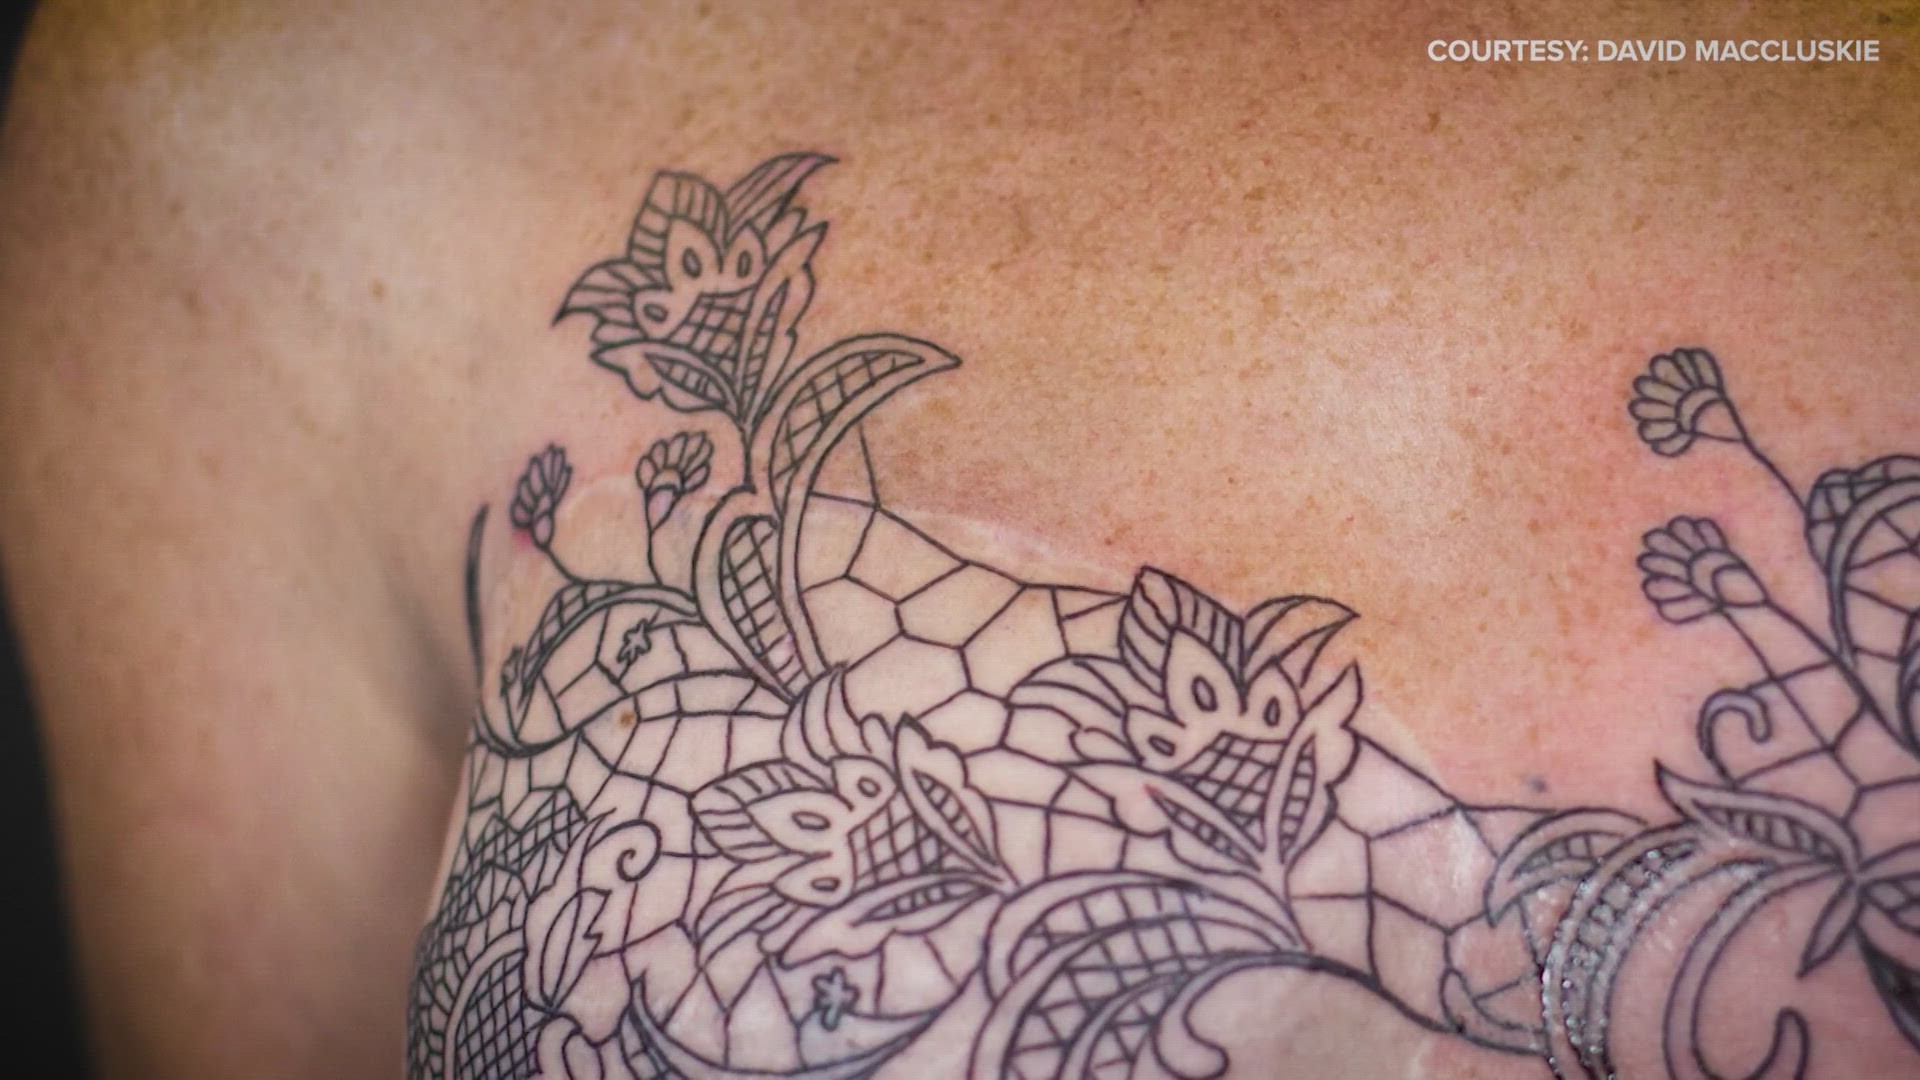 Woman's breast reconstruction tattoo post mastectomy goes viral | MiNDFOOD